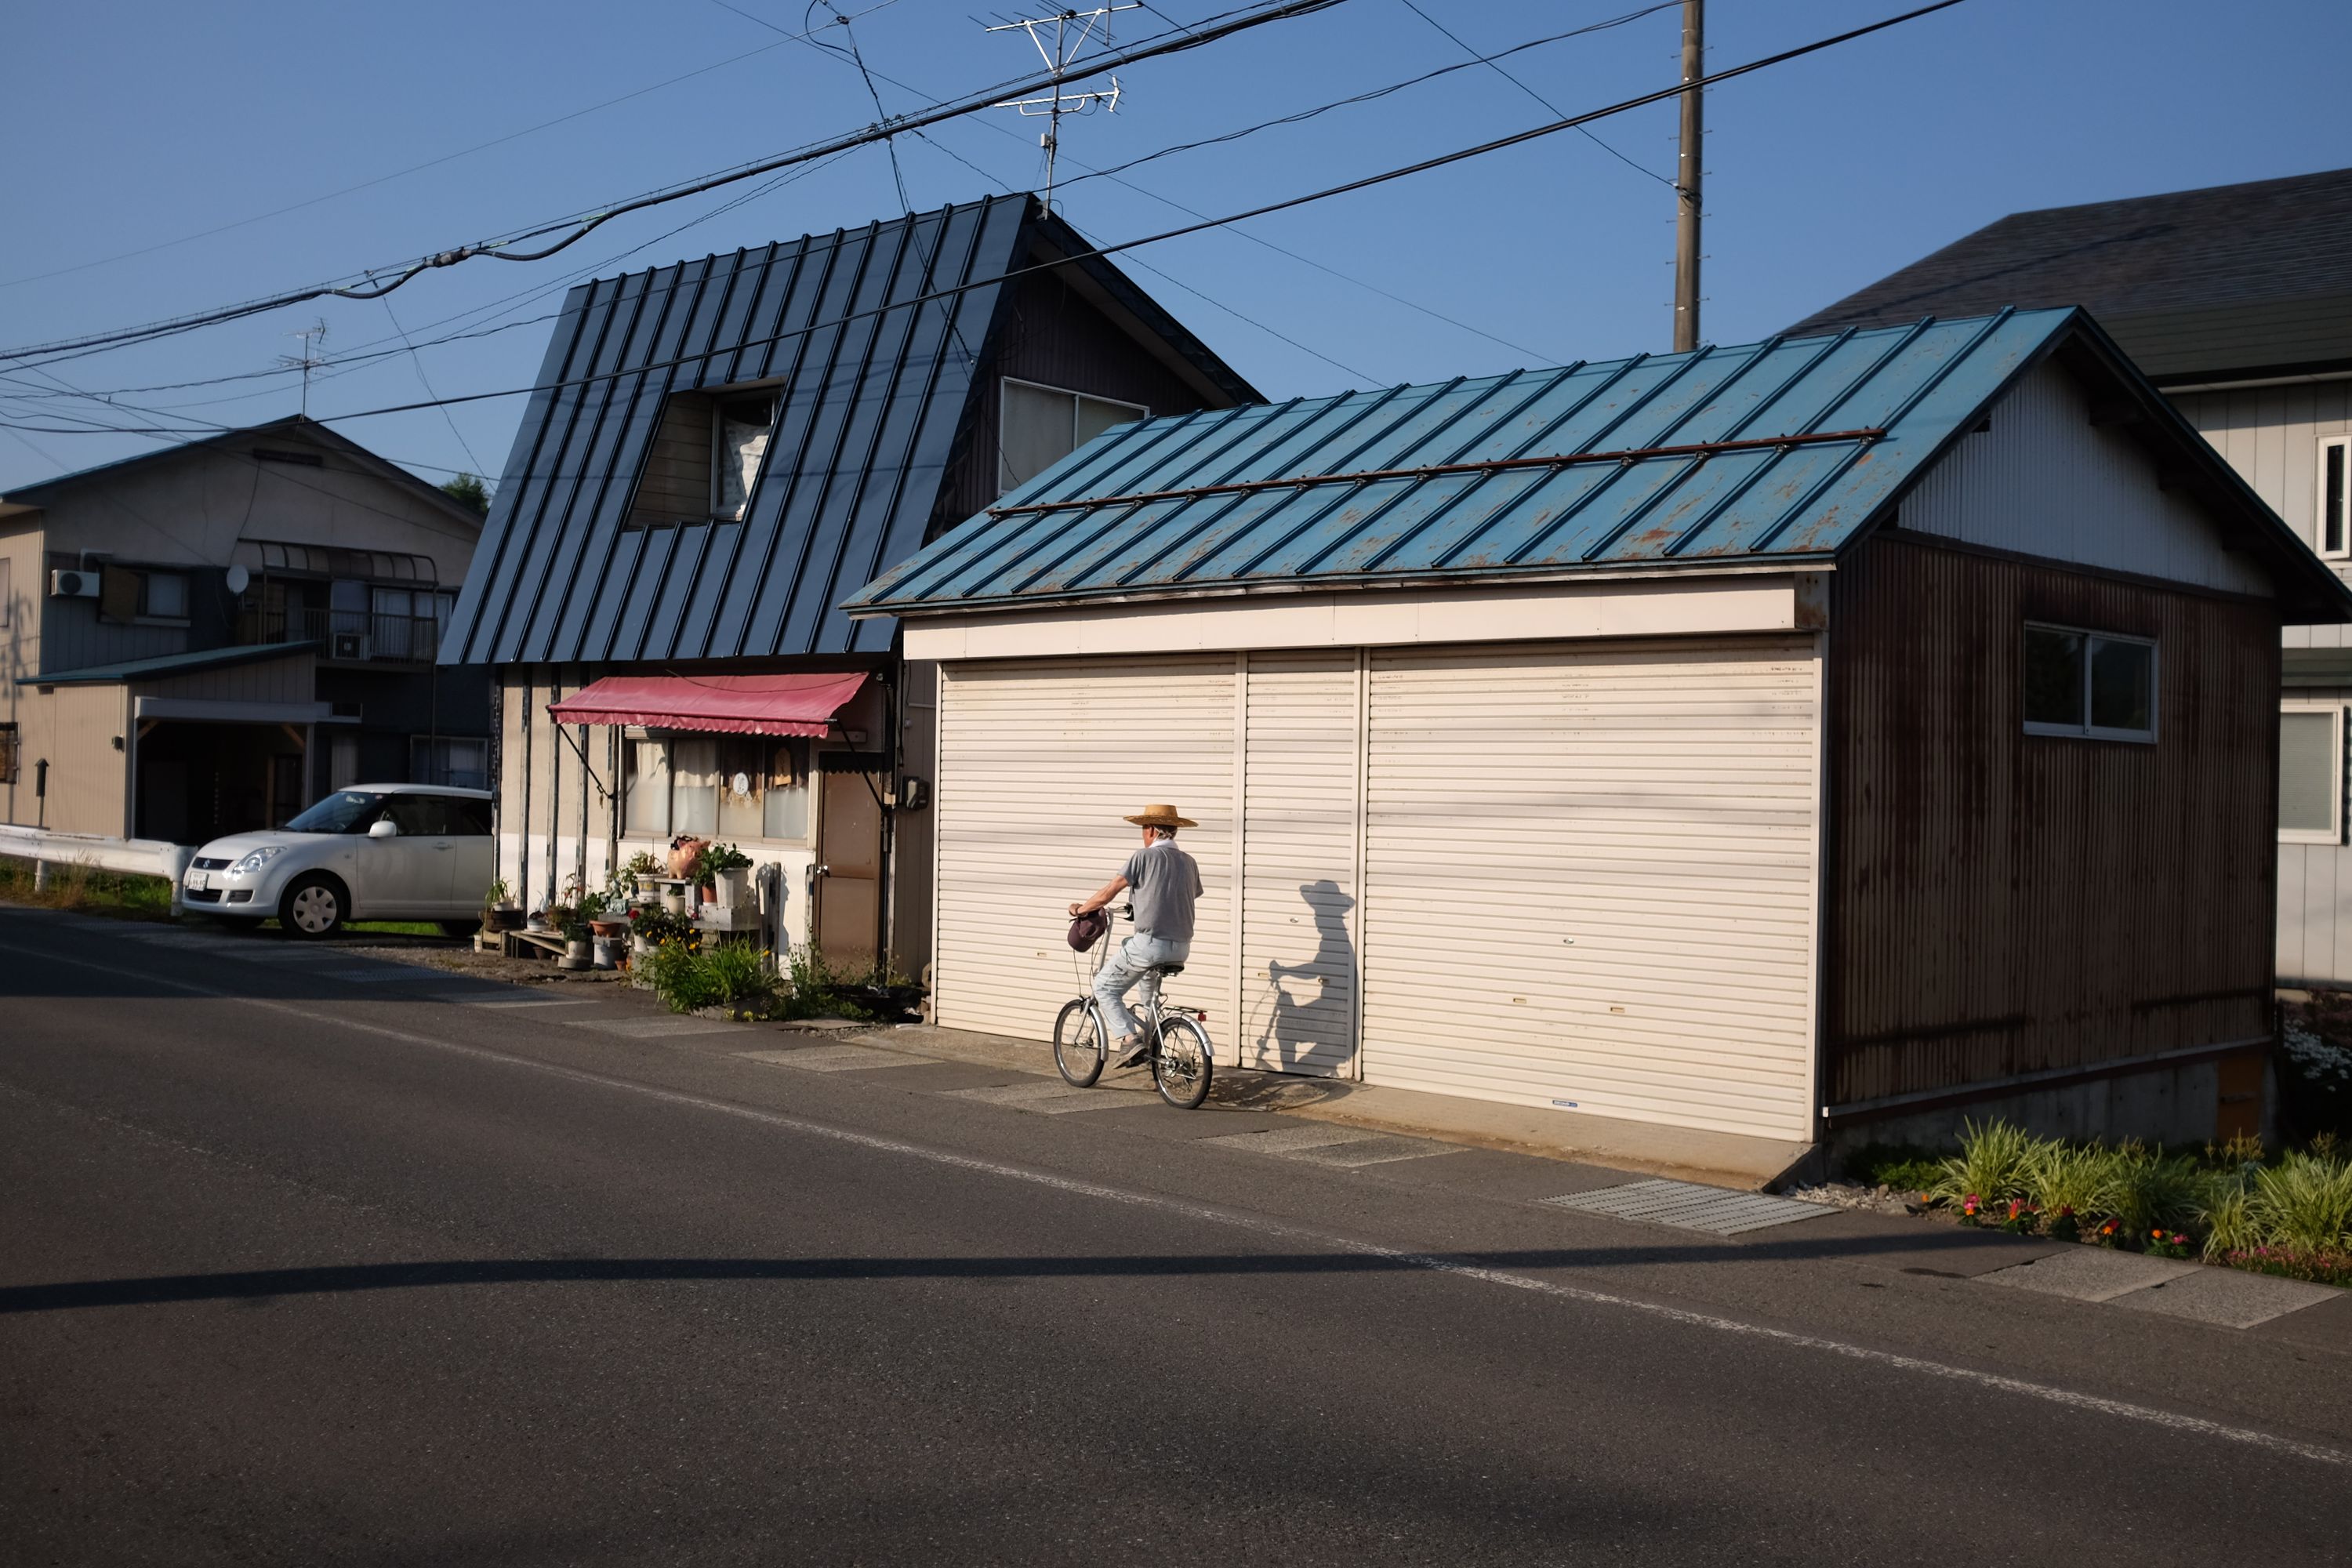 A man in a straw hat rides a bicycle in front of a house with a steep, asymmetrically pitched roof.